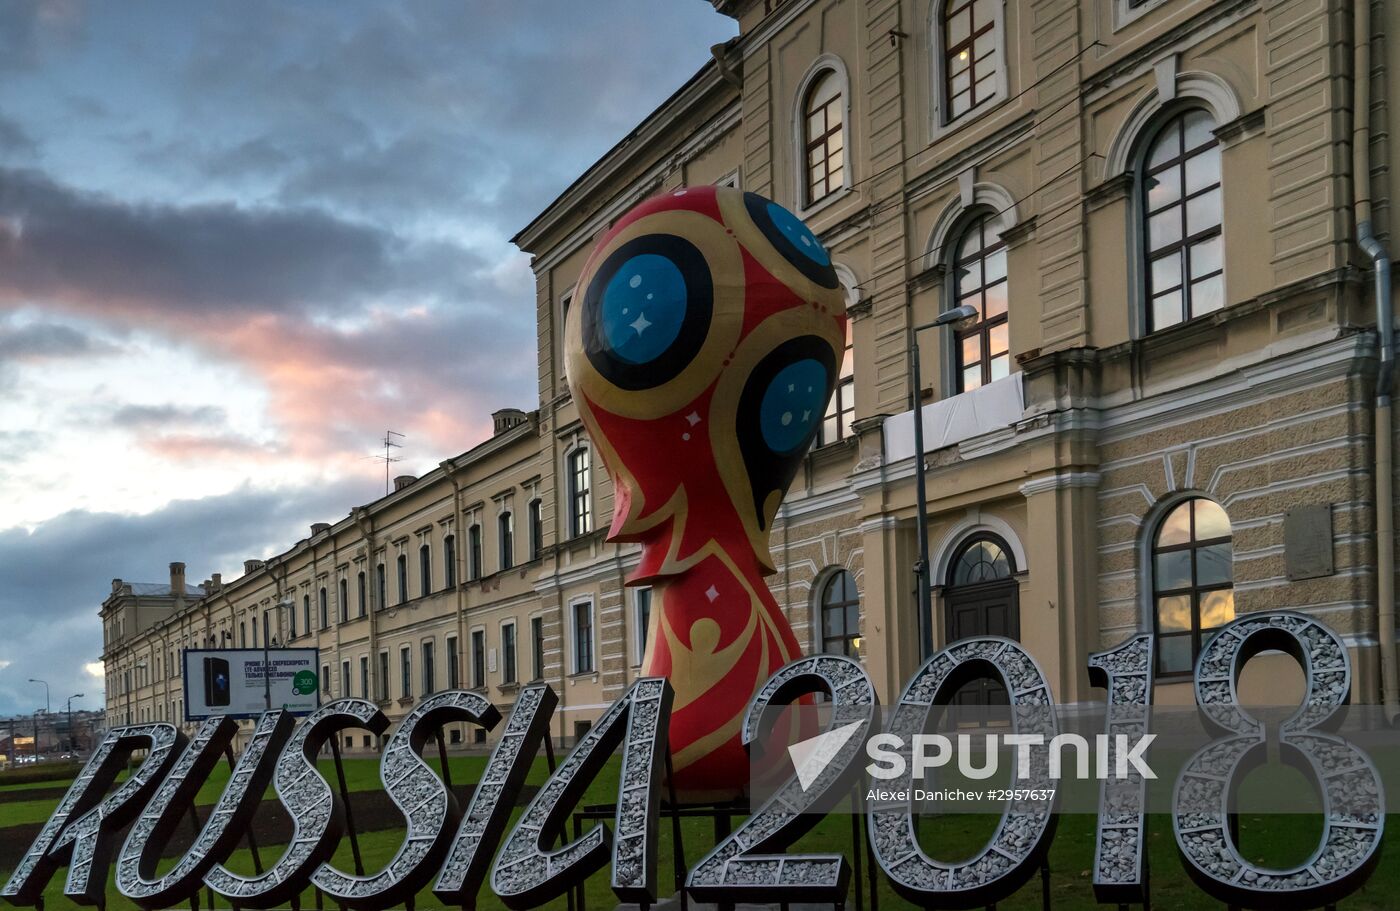 2018 FIFA World Cup emblem installed in St Petersburg